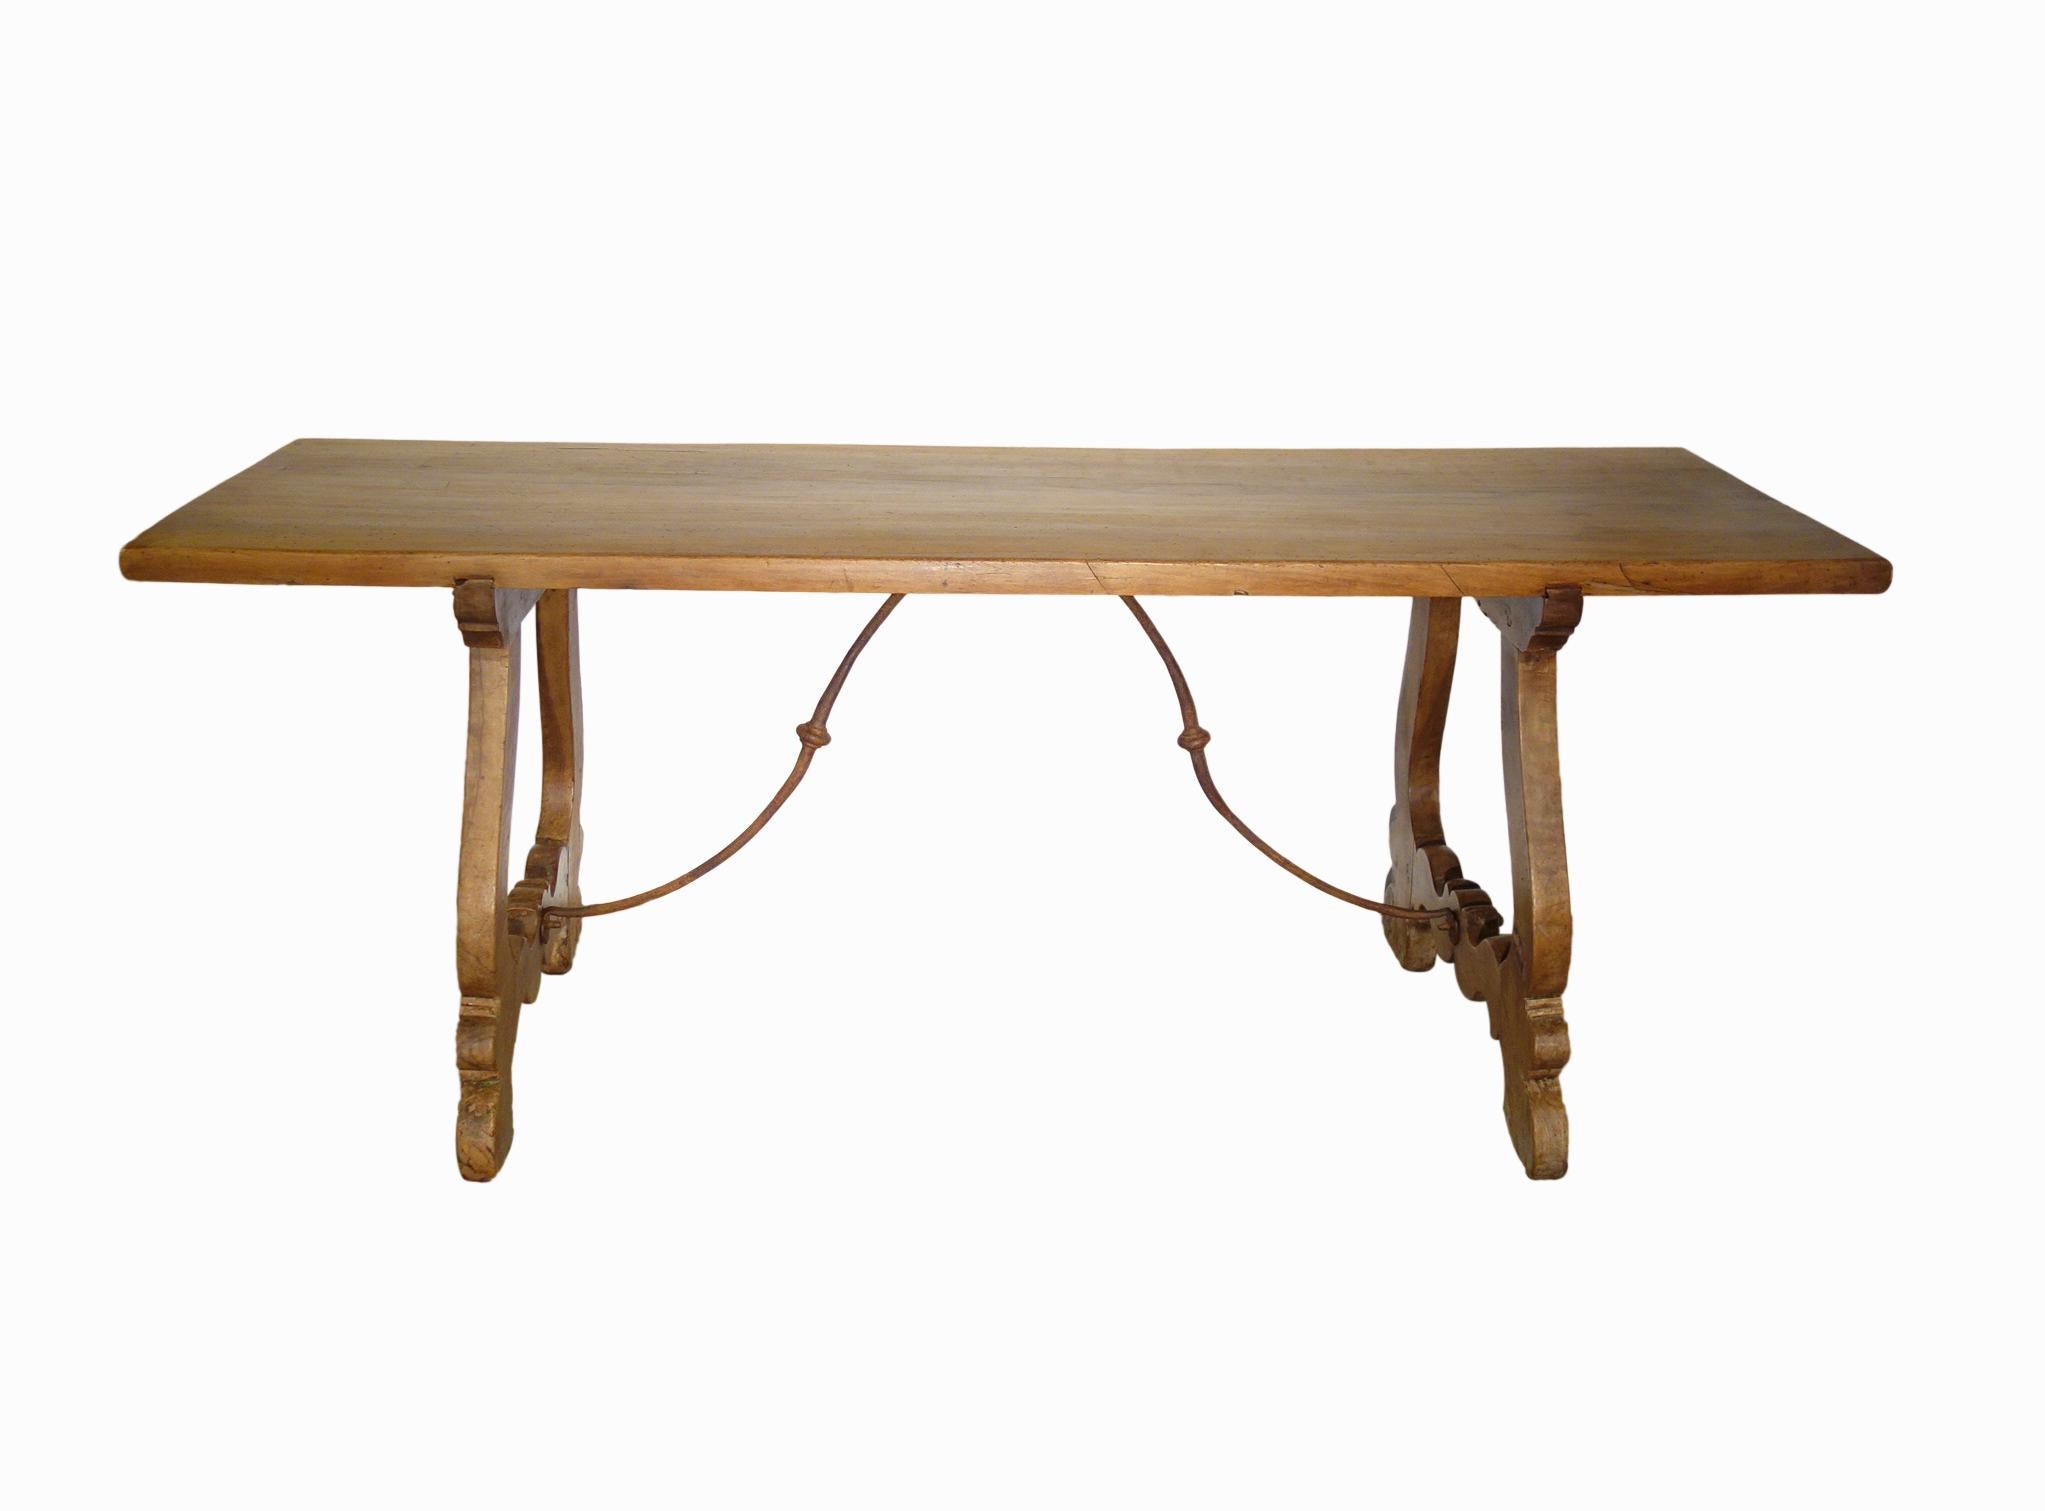 Rustic Italian Walnut Farmhouse Table style with Forged Iron in reproduction sizes For Sale